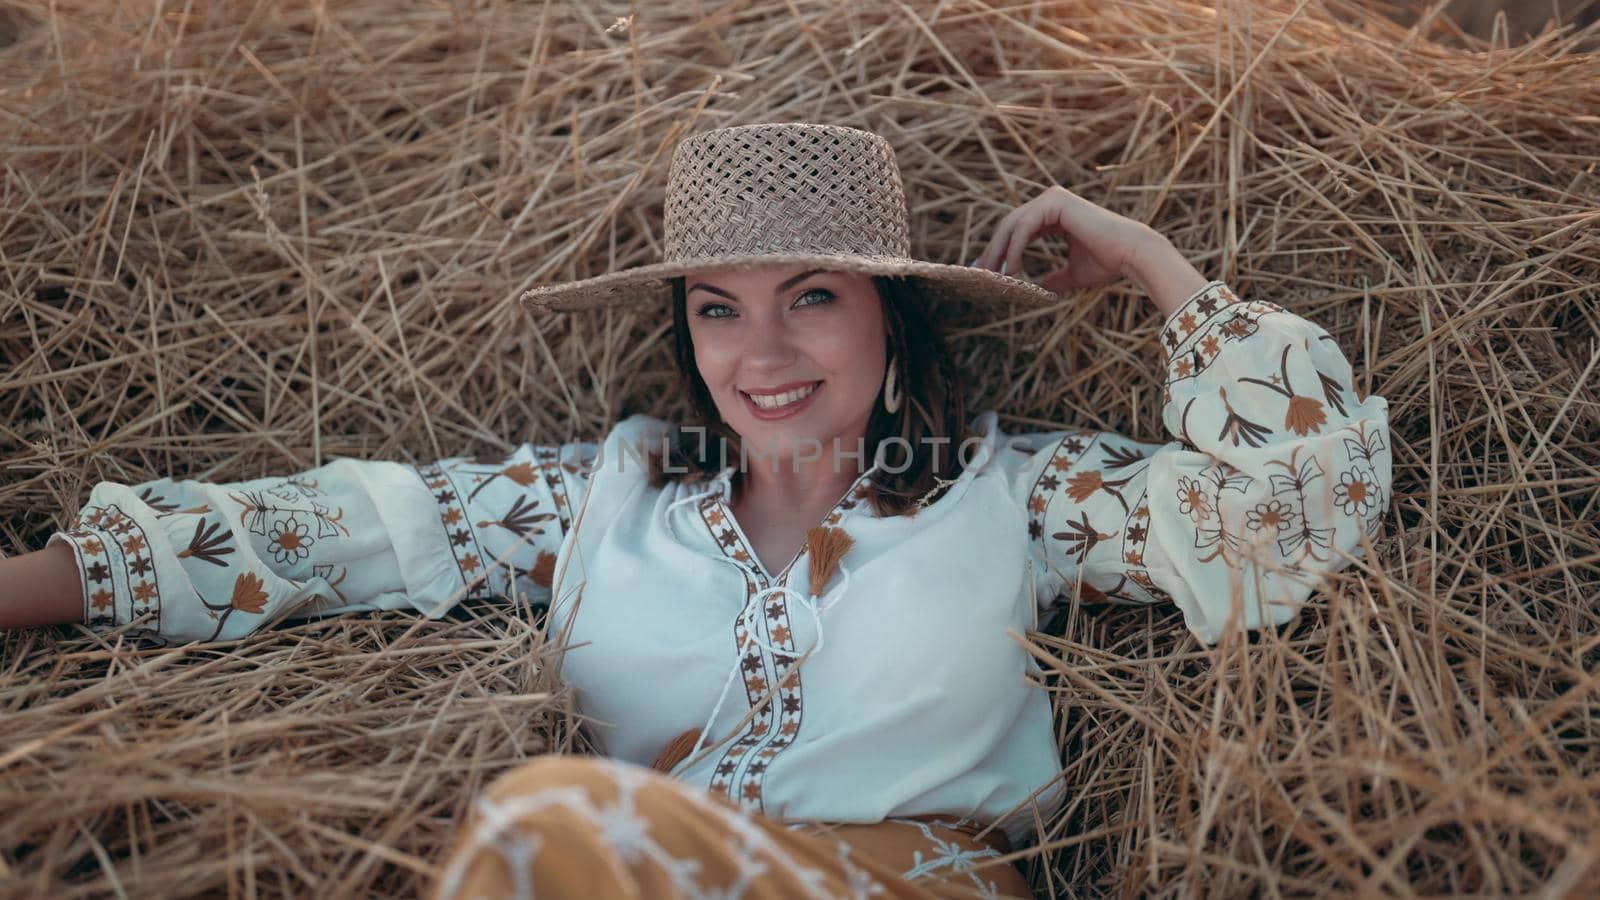 Pretty woman in straw hat and embroidered blouse smiling lying on hay in countryside at sunset. Rural nature, haystack, vacation, relax and harvest concept. High quality photo